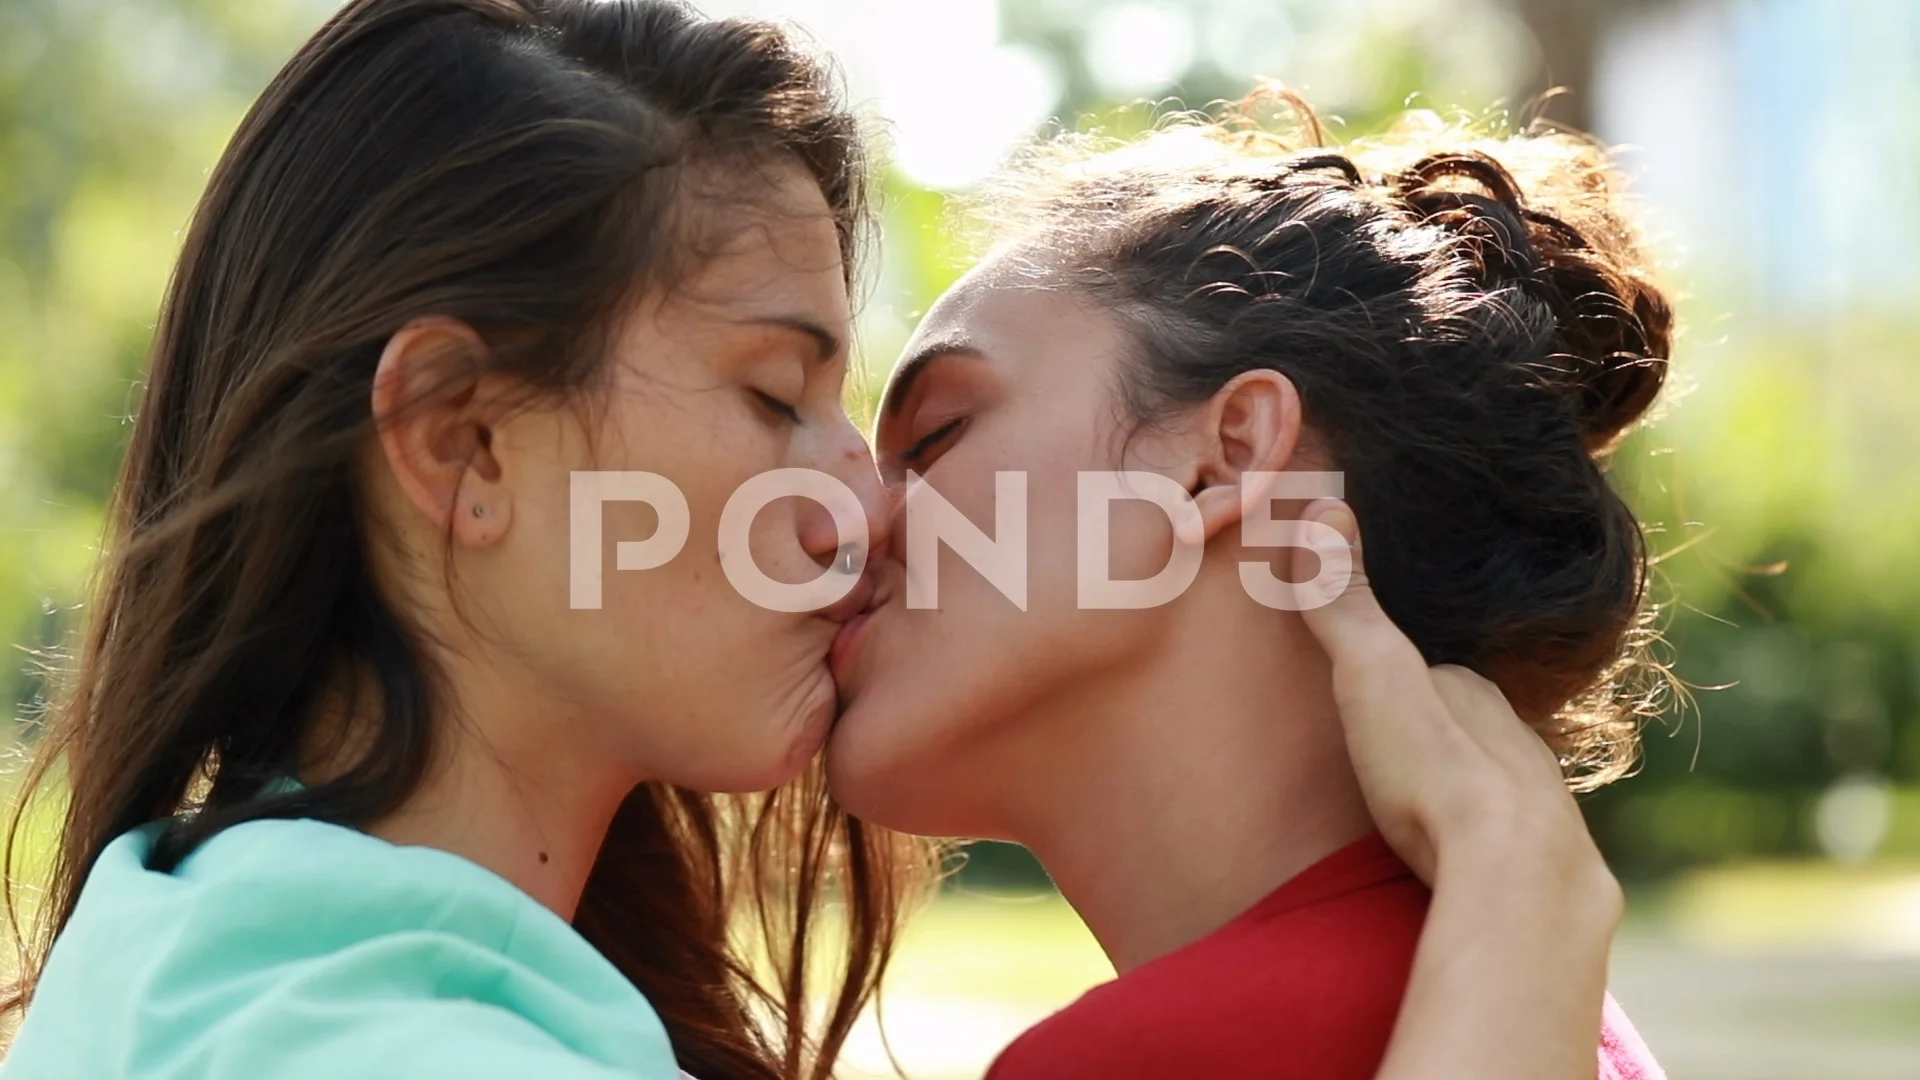 Hot Lesbians French Kissing - Hot Sex Photos, Free XXX Pics and Best Porn  Images on www.cafesex.net